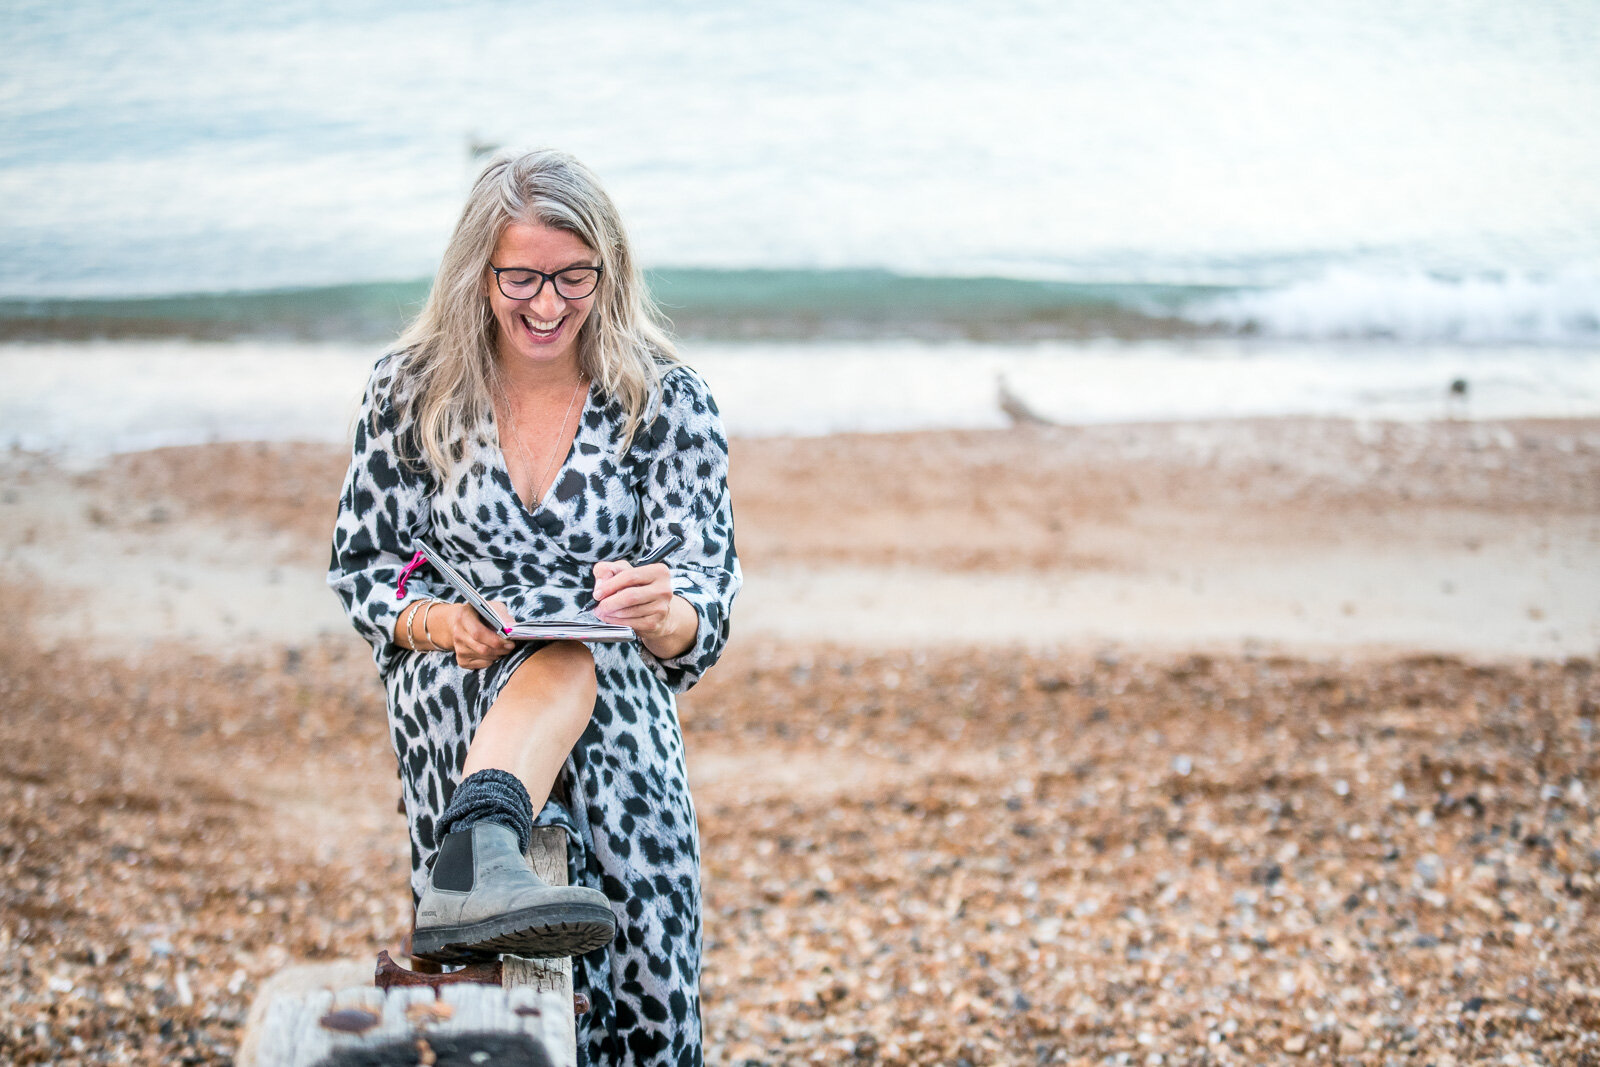 Brand Portrait Images for re-branded website and social media with Sussex Brighton Hove London female photographer and videographer